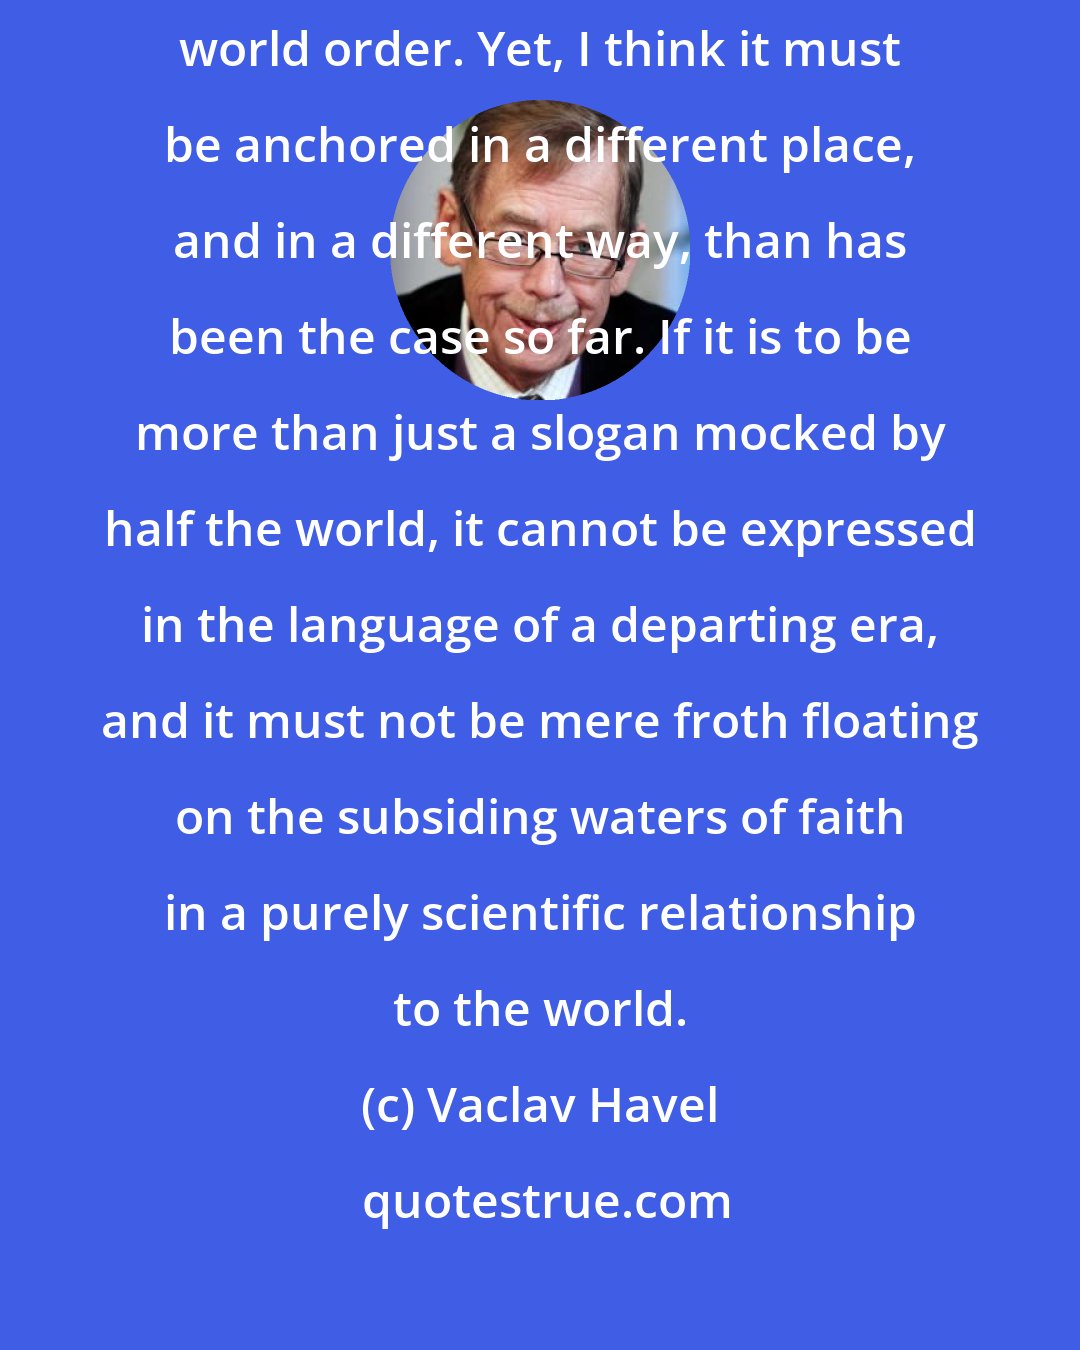 Vaclav Havel: The idea of human rights and freedoms must be an integral part of any meaningful world order. Yet, I think it must be anchored in a different place, and in a different way, than has been the case so far. If it is to be more than just a slogan mocked by half the world, it cannot be expressed in the language of a departing era, and it must not be mere froth floating on the subsiding waters of faith in a purely scientific relationship to the world.